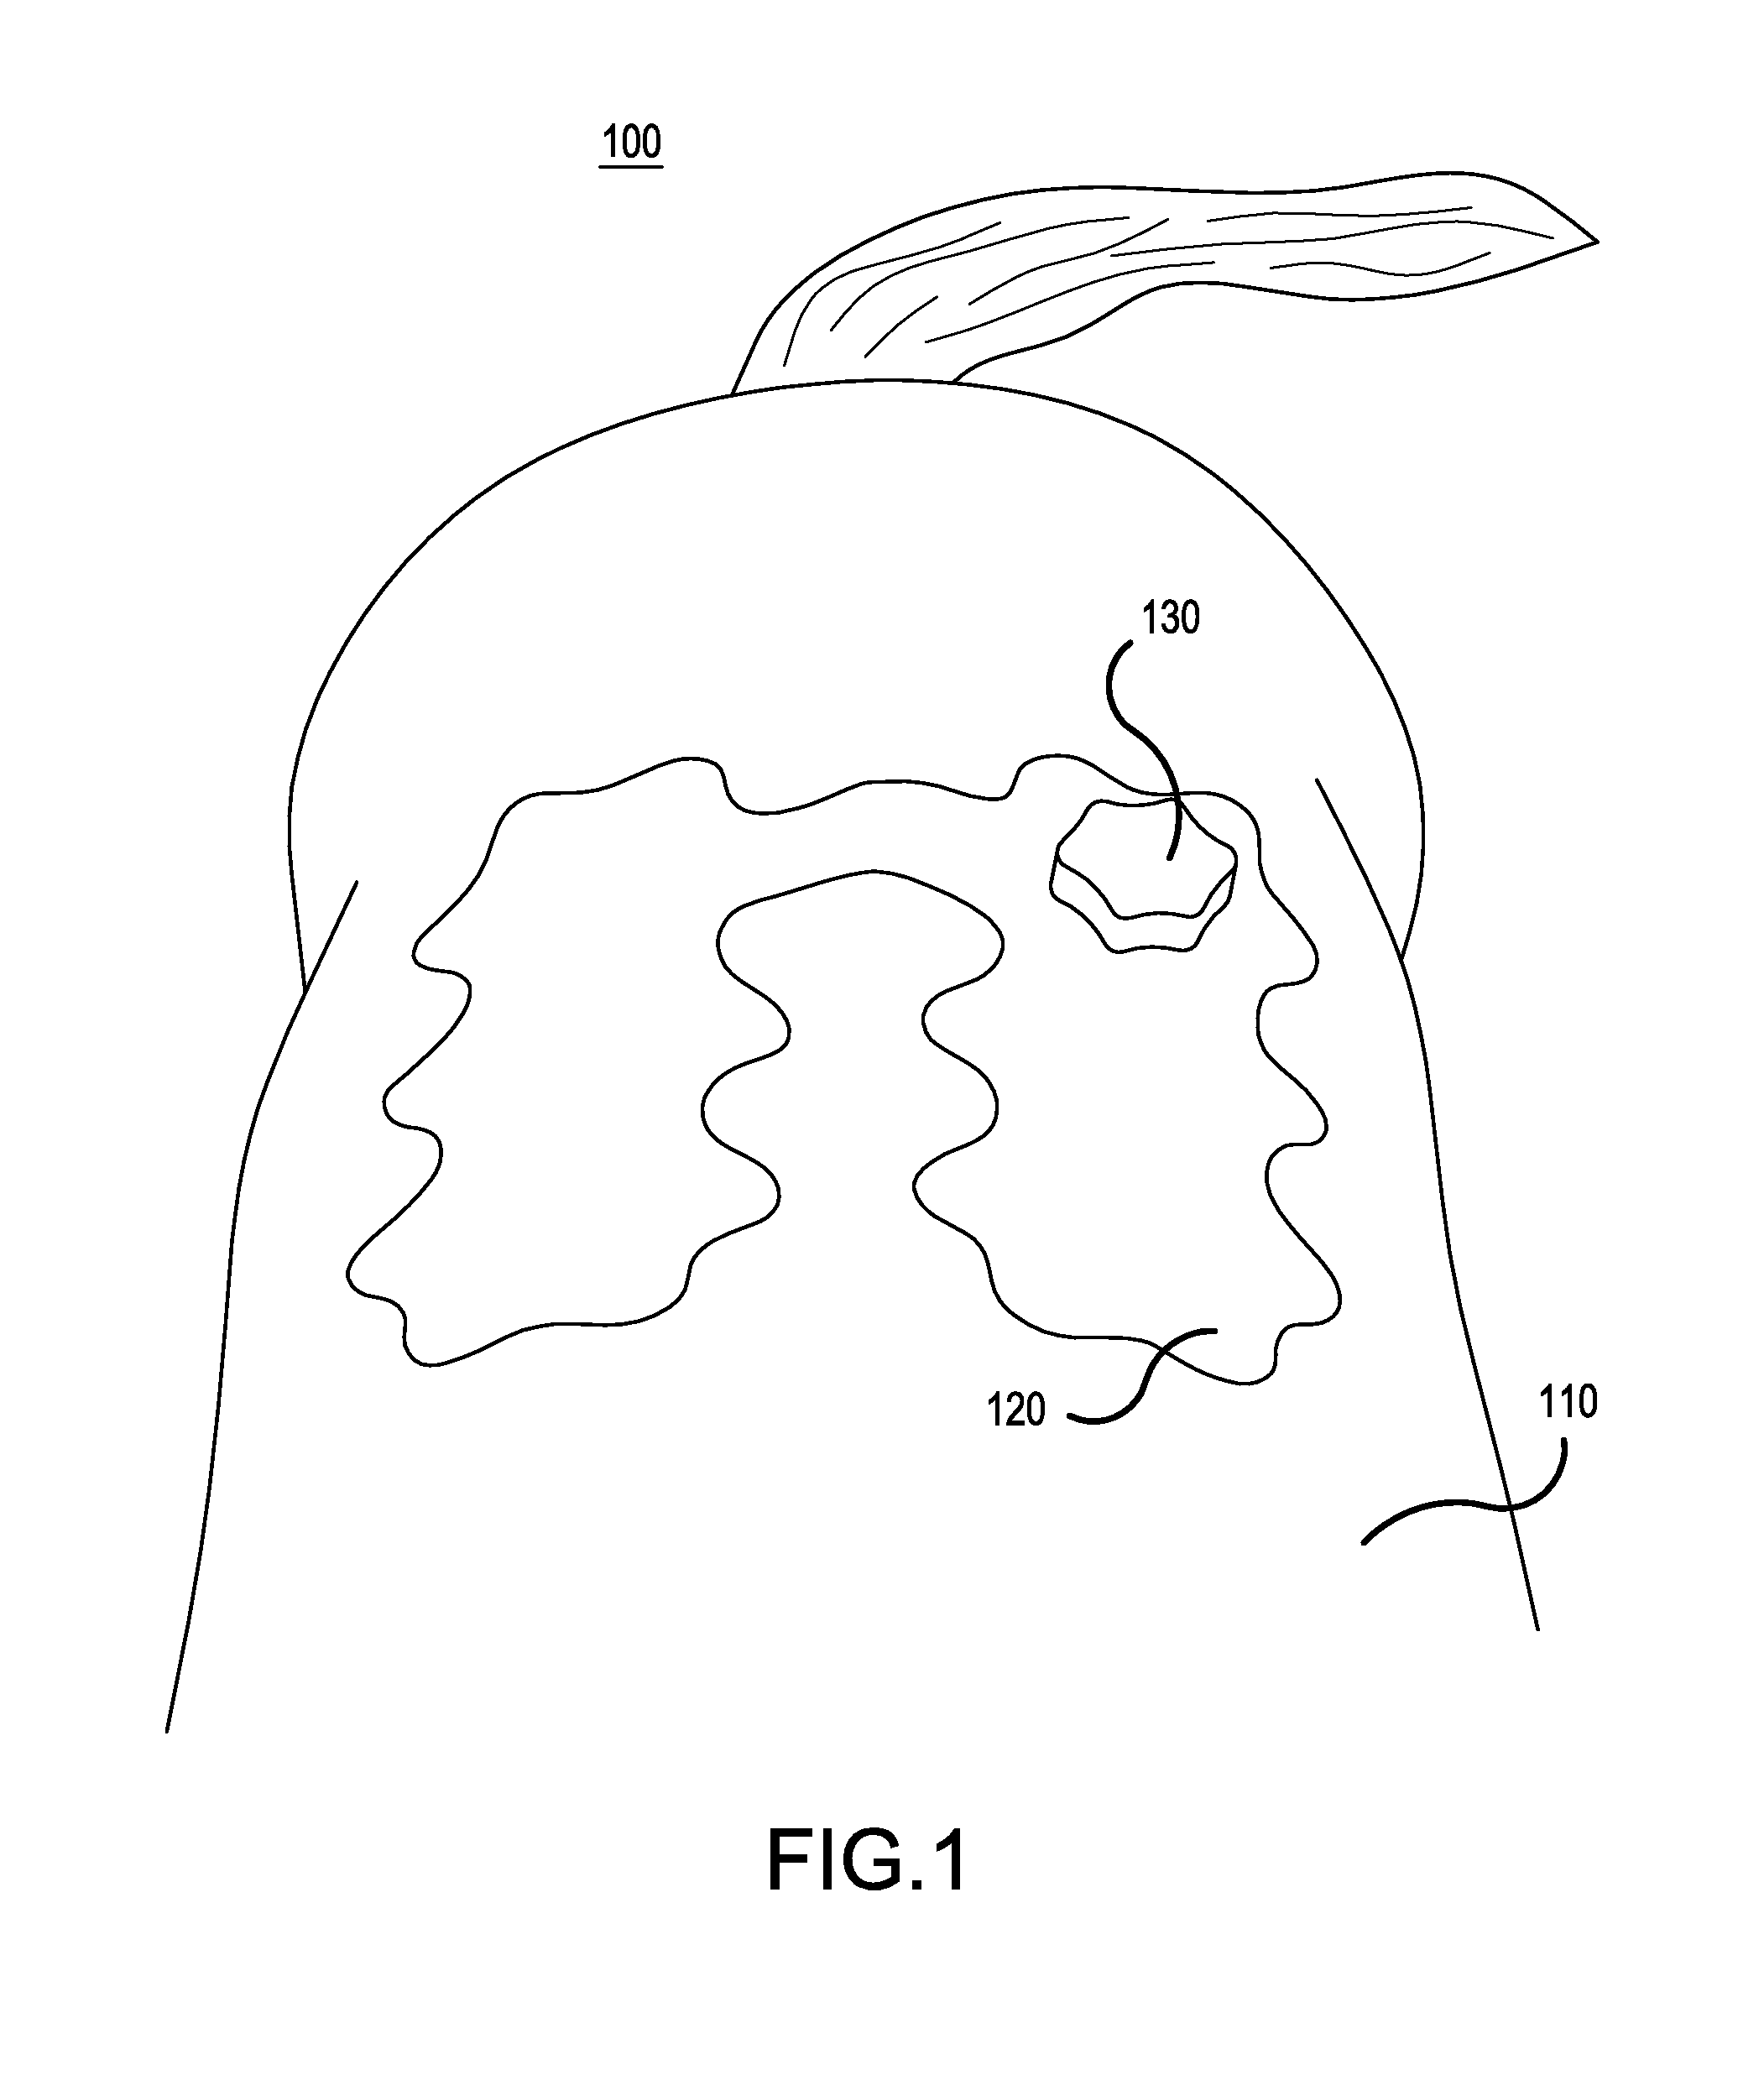 Electro-stimulation device and method of systematically compounded modulation of current intensity with other output parameters for affecting biological tissues